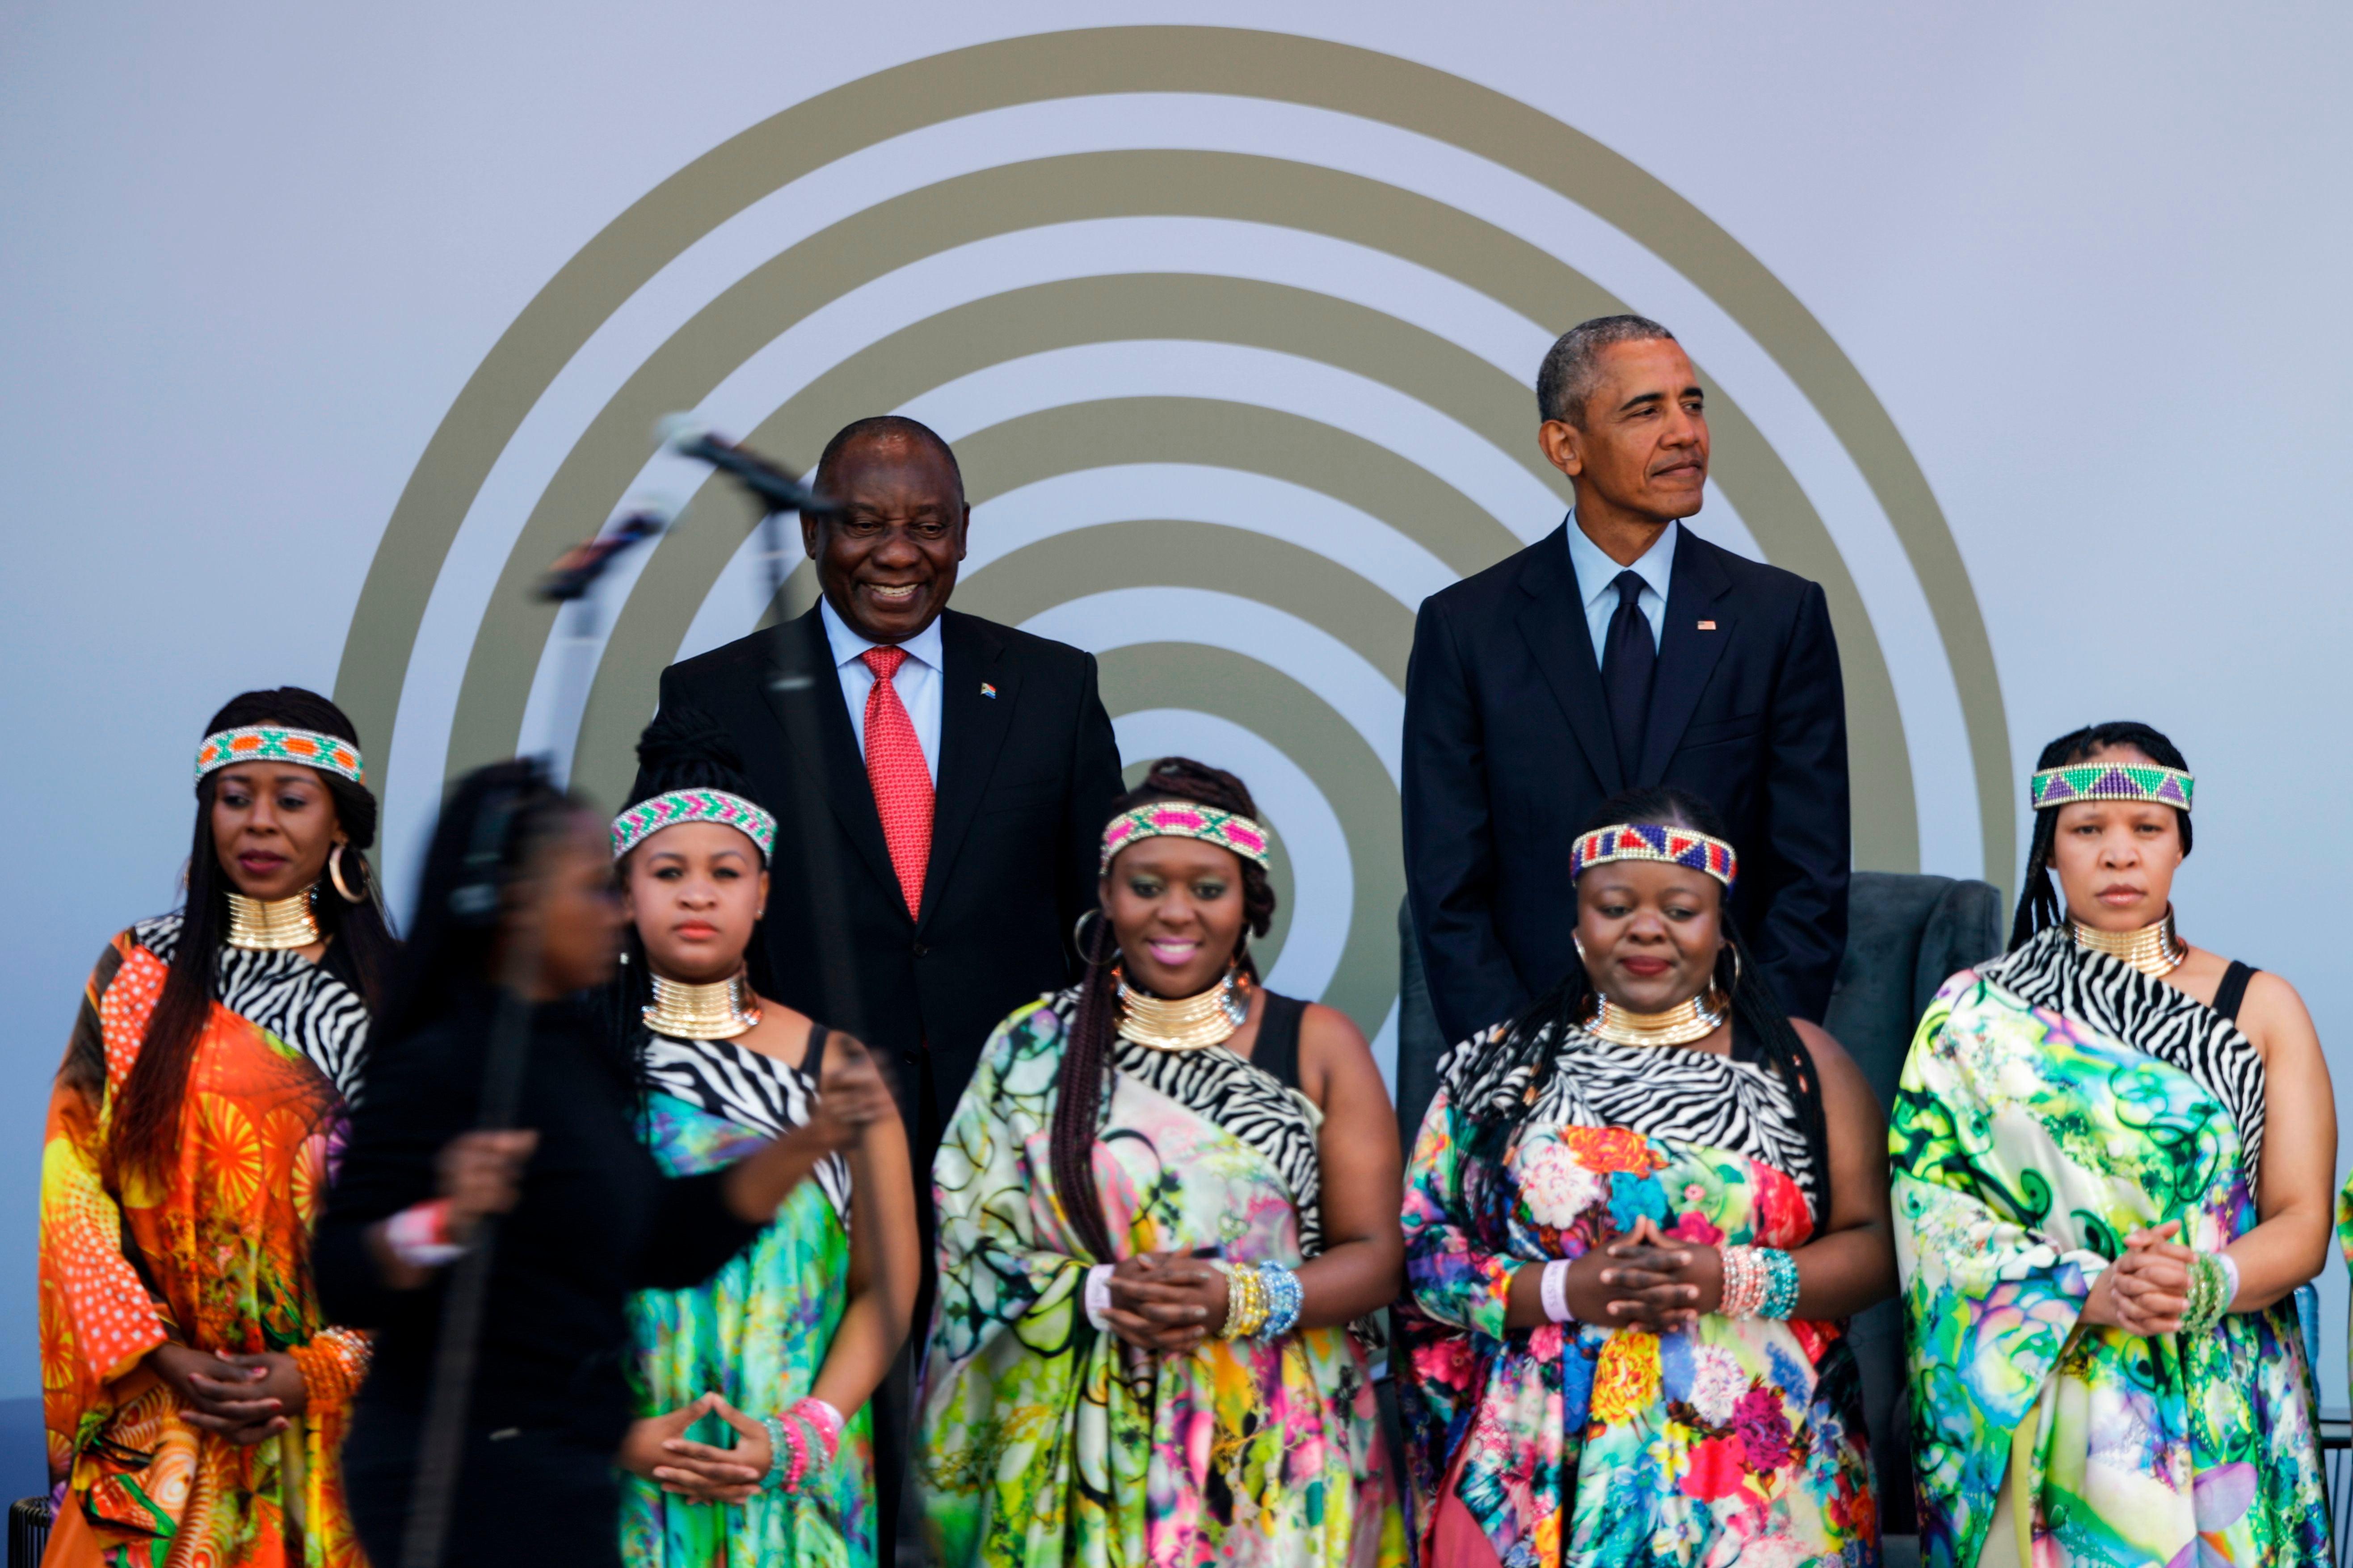 See Photos Of President Barack Obama's Historic Visit To South Africa And Kenya 
